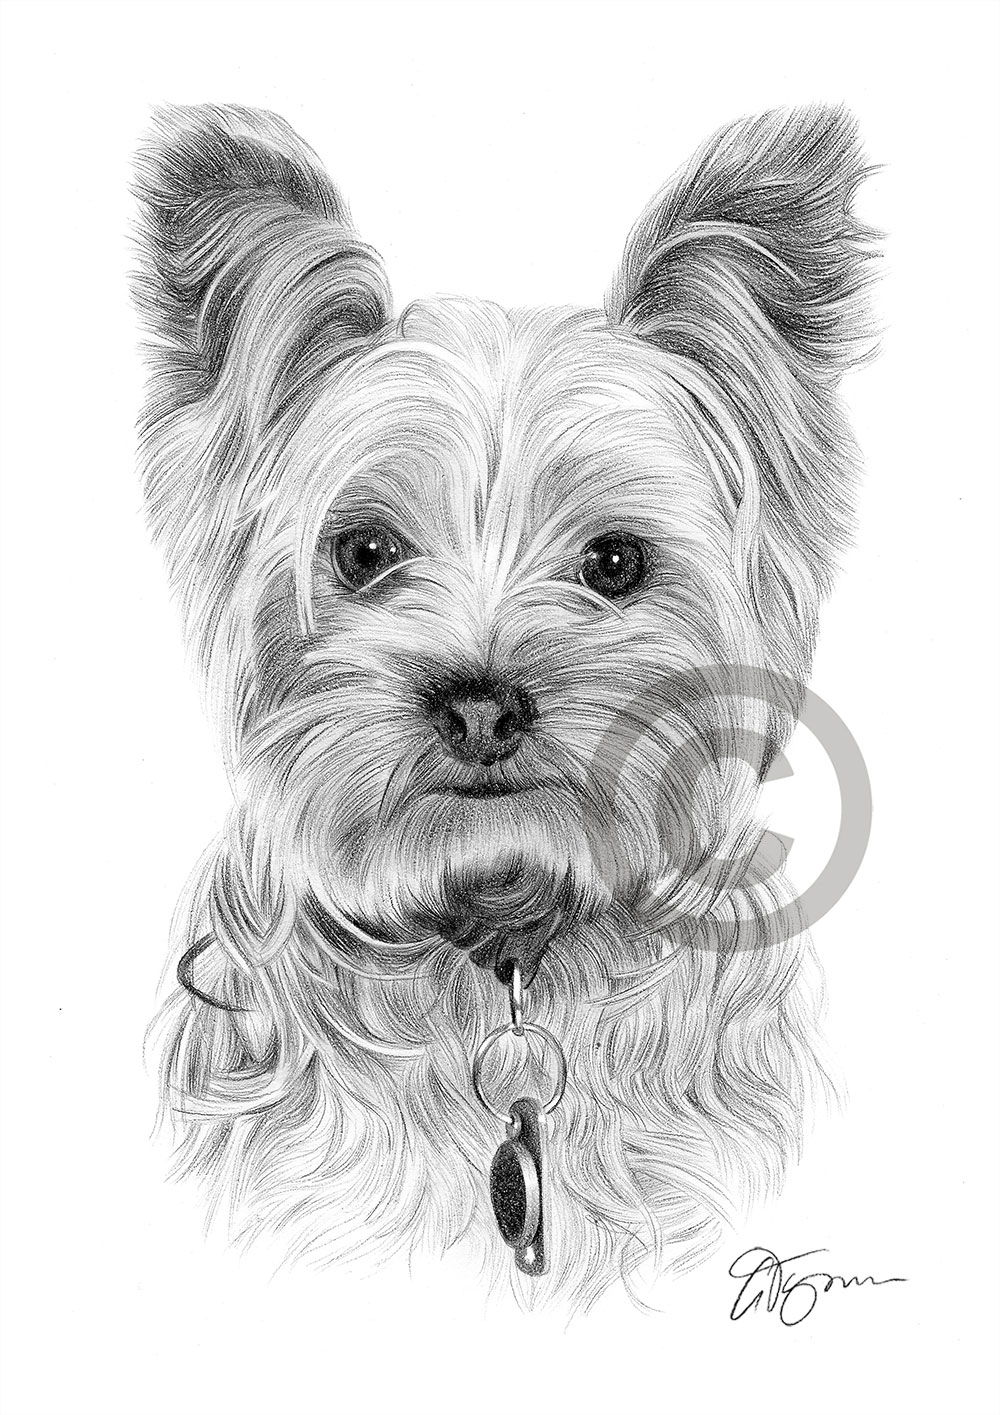 Pencil drawing of a Yorkshire Terrier by artist Gary Tymon